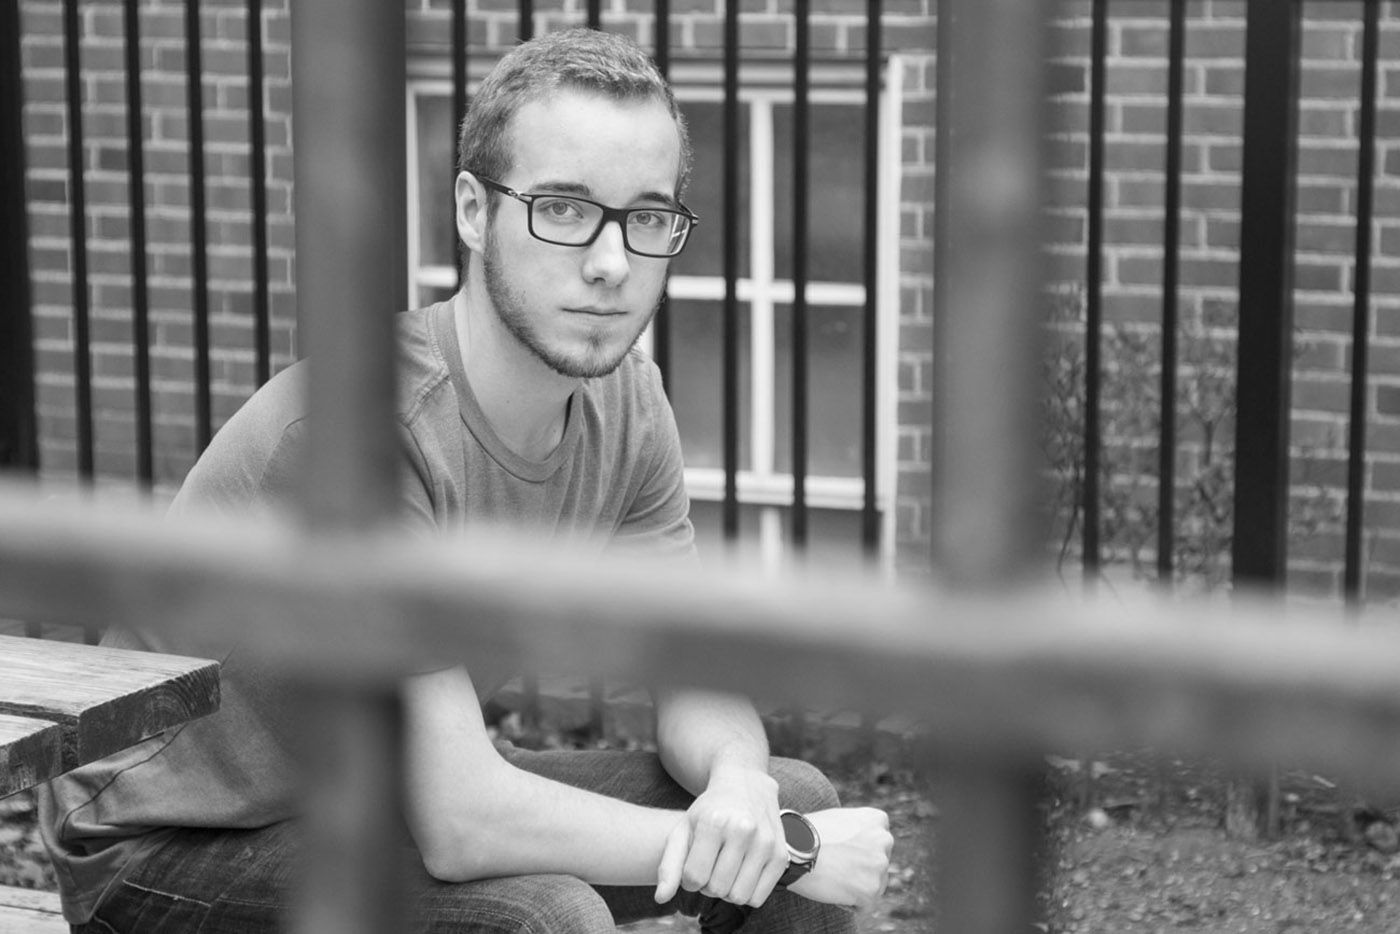 Man wearing glasses with prison gates in front and behind him